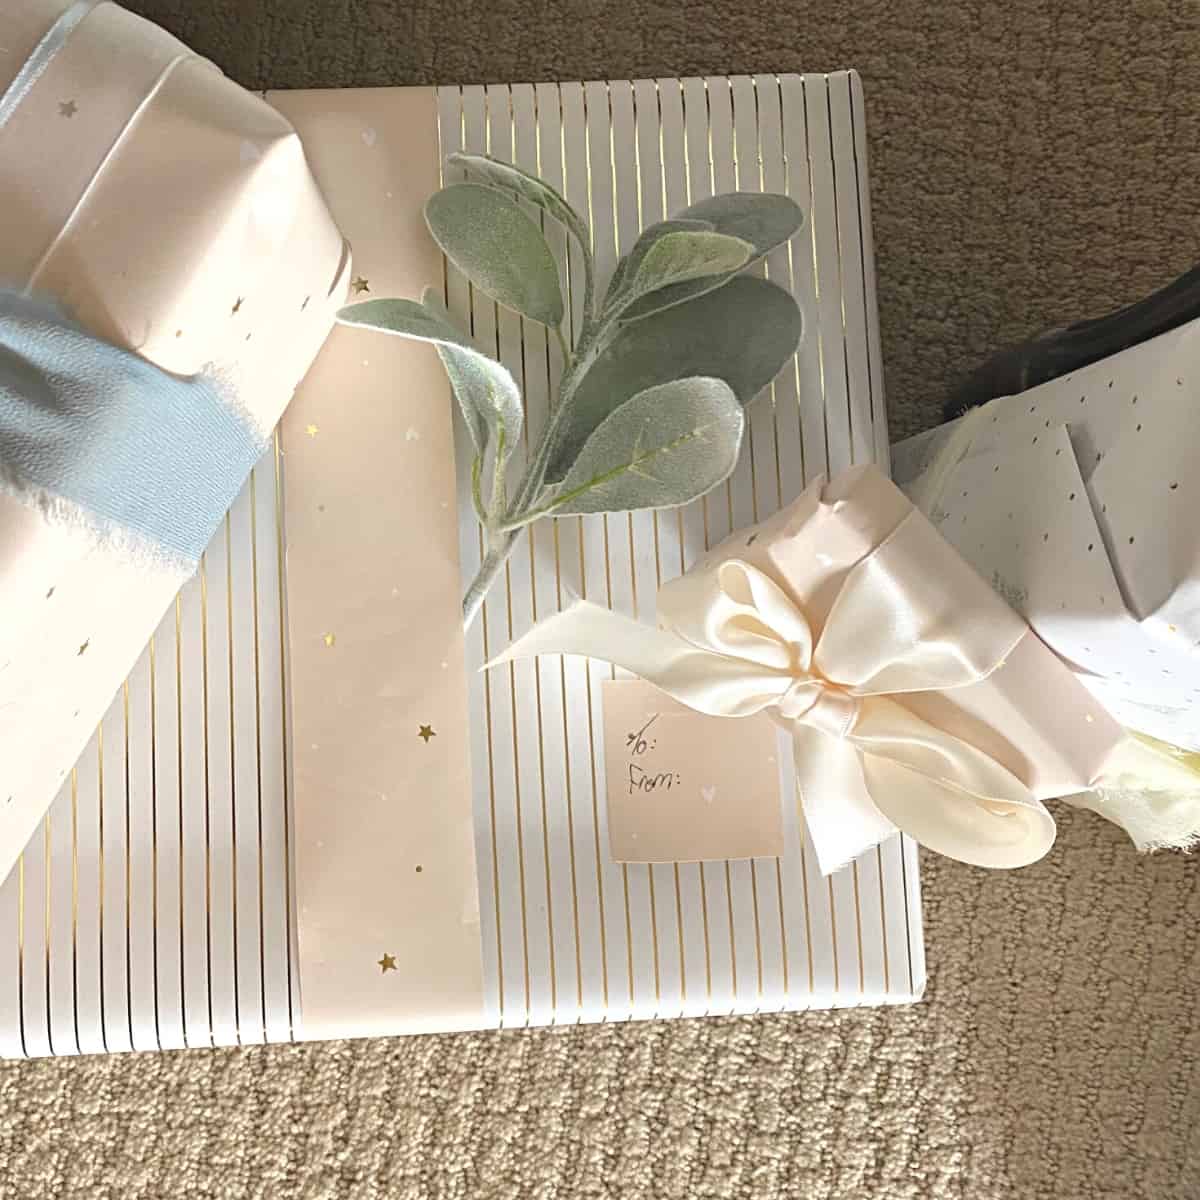 Gold stripe present, a sprig of lambs ear greenery, flanked by other neutral wrapped gifts